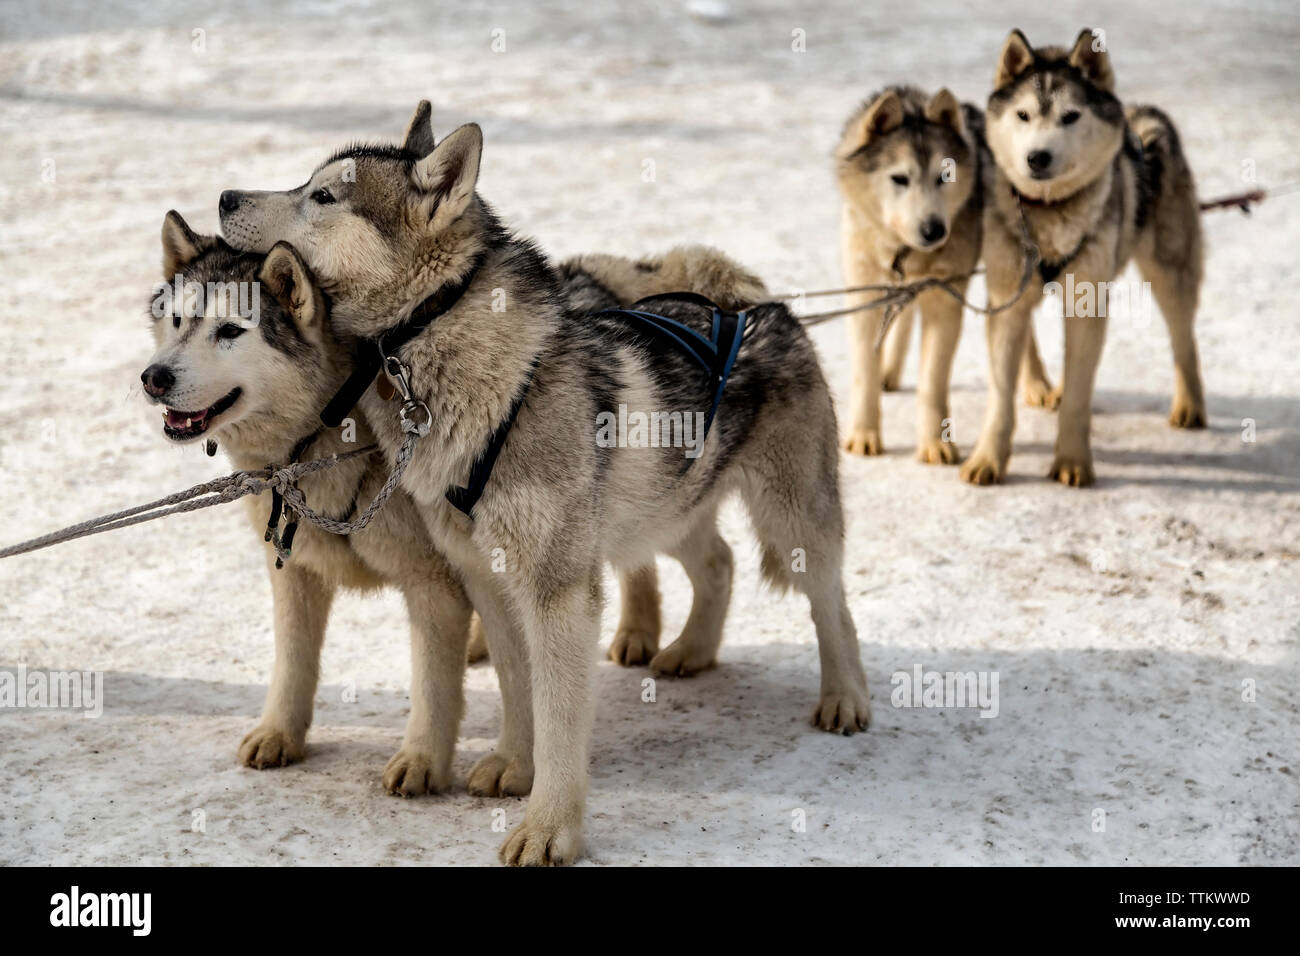 Sled Dogs standing on snowy field Stock Photo